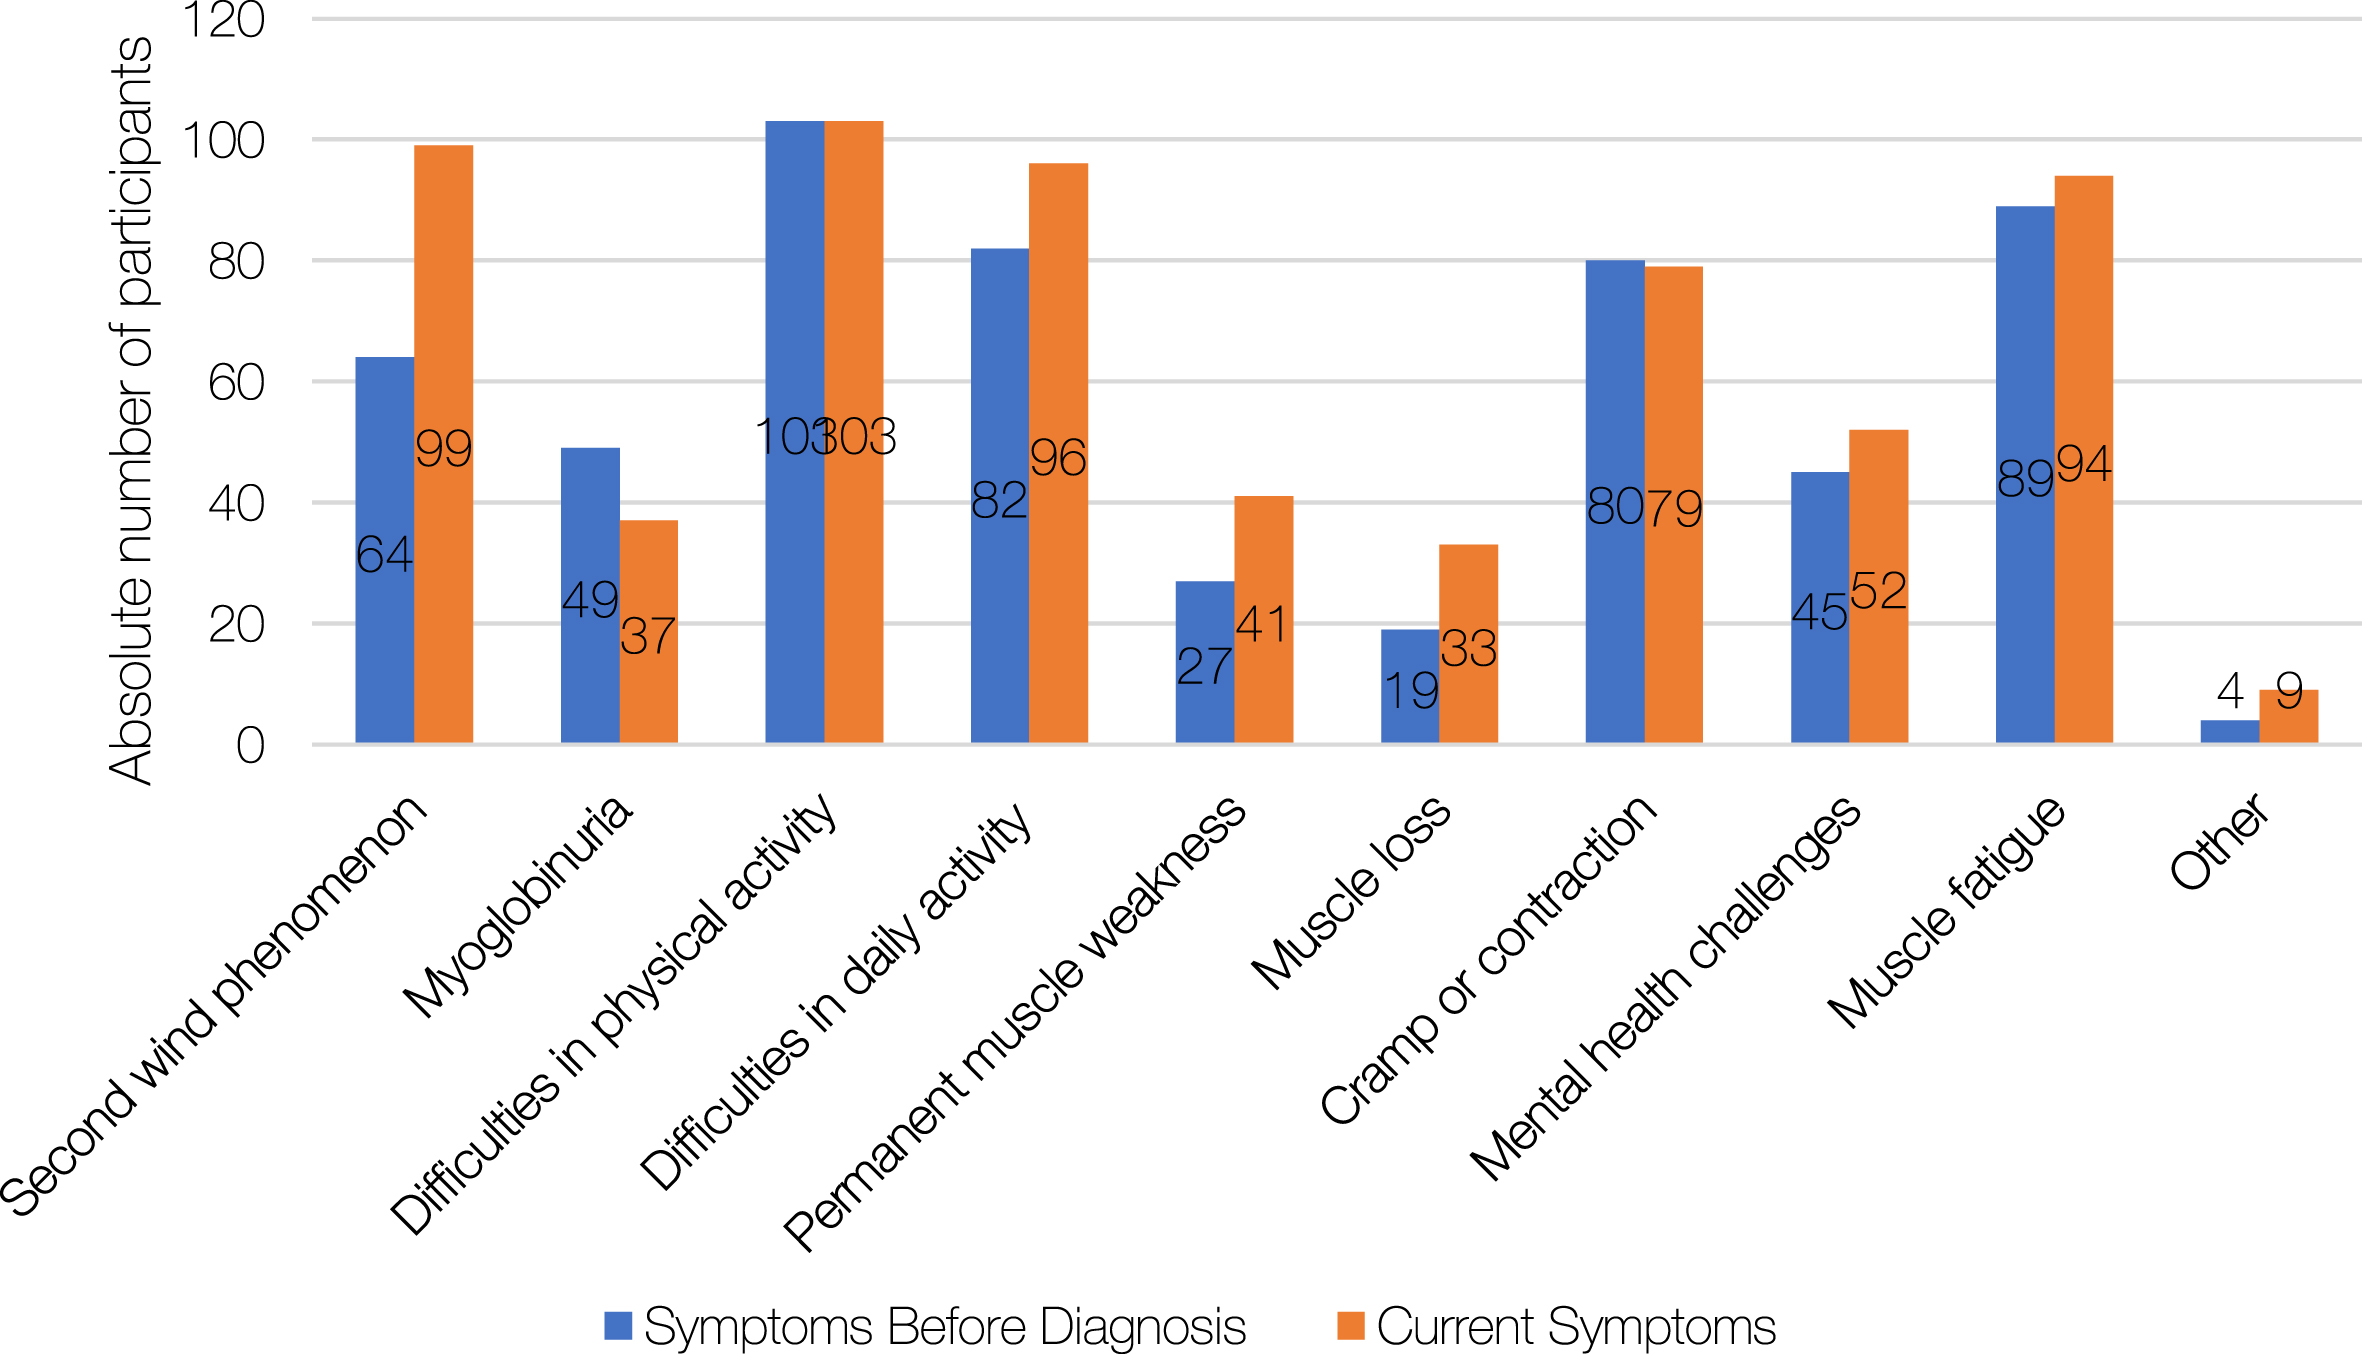 Symptoms of glycogen storage disease 5 (GSD5) before and after diagnosis. Total respondents: n = 133.